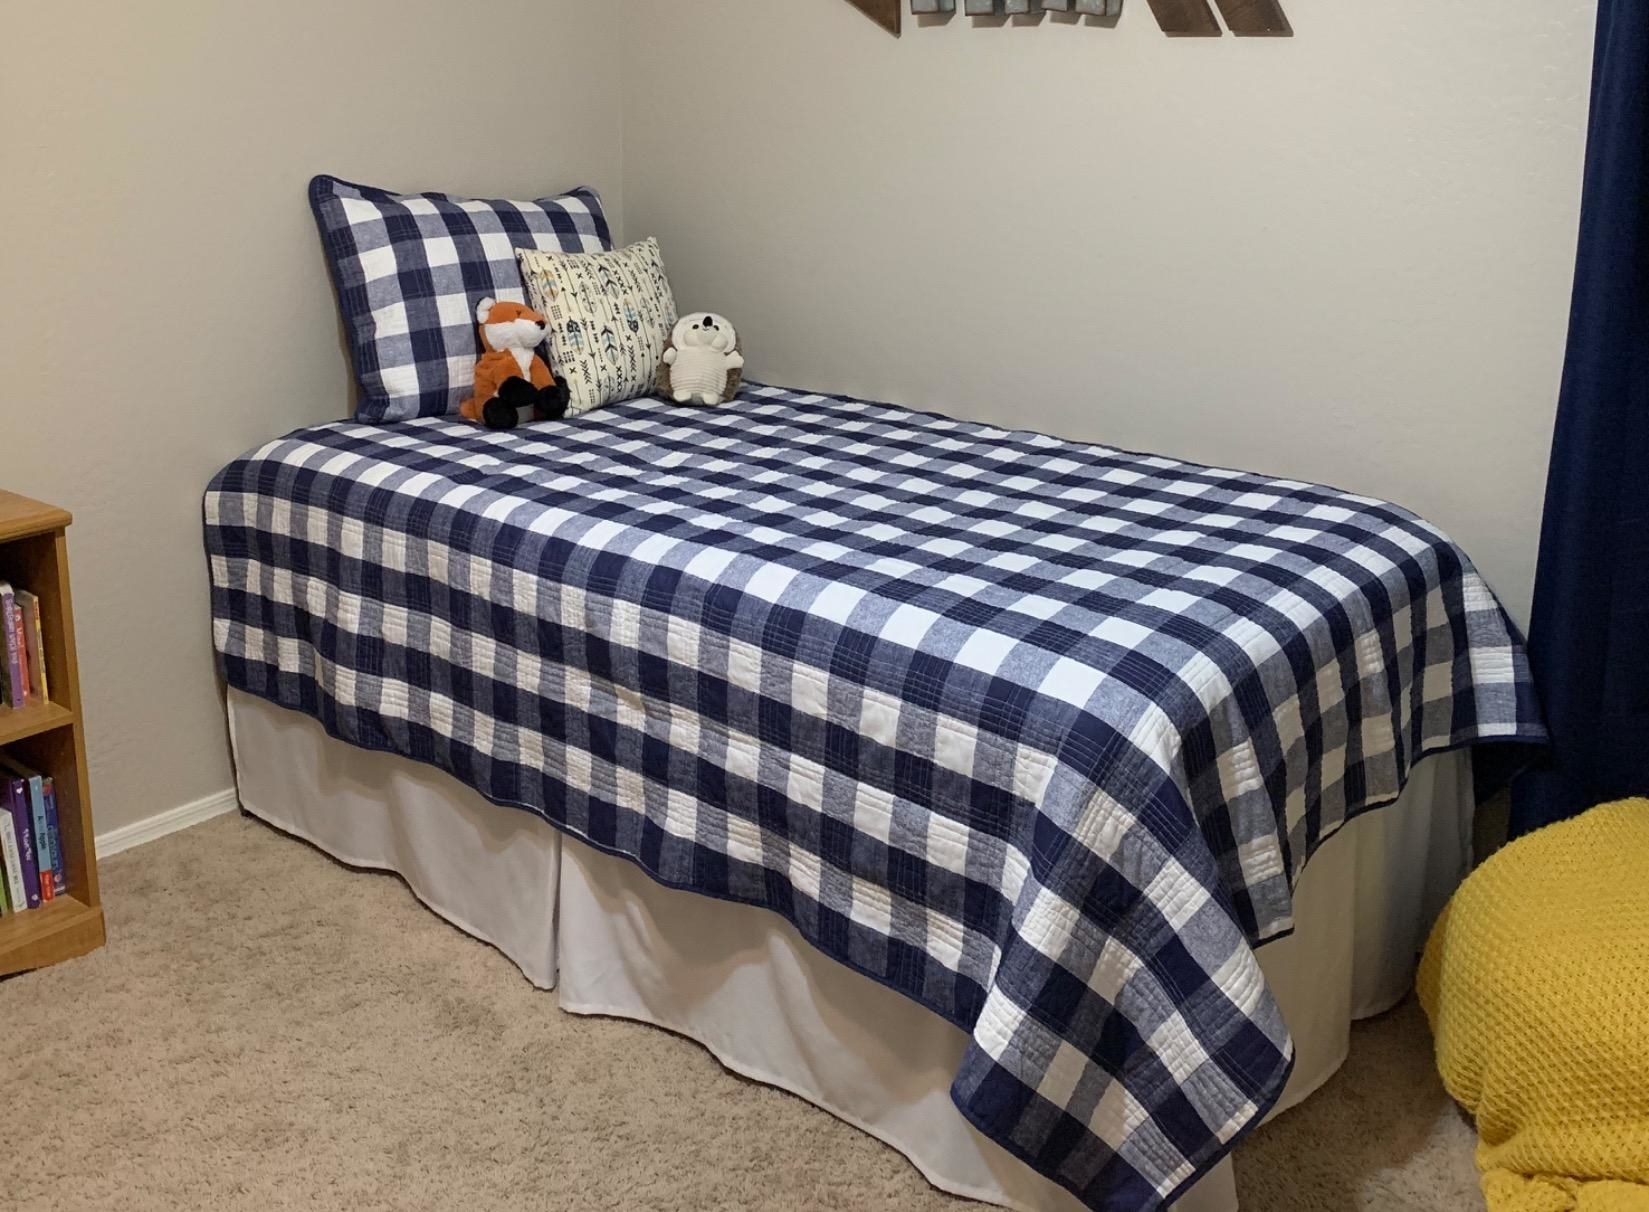 Reviewer image of white bed skirt on a twin bed